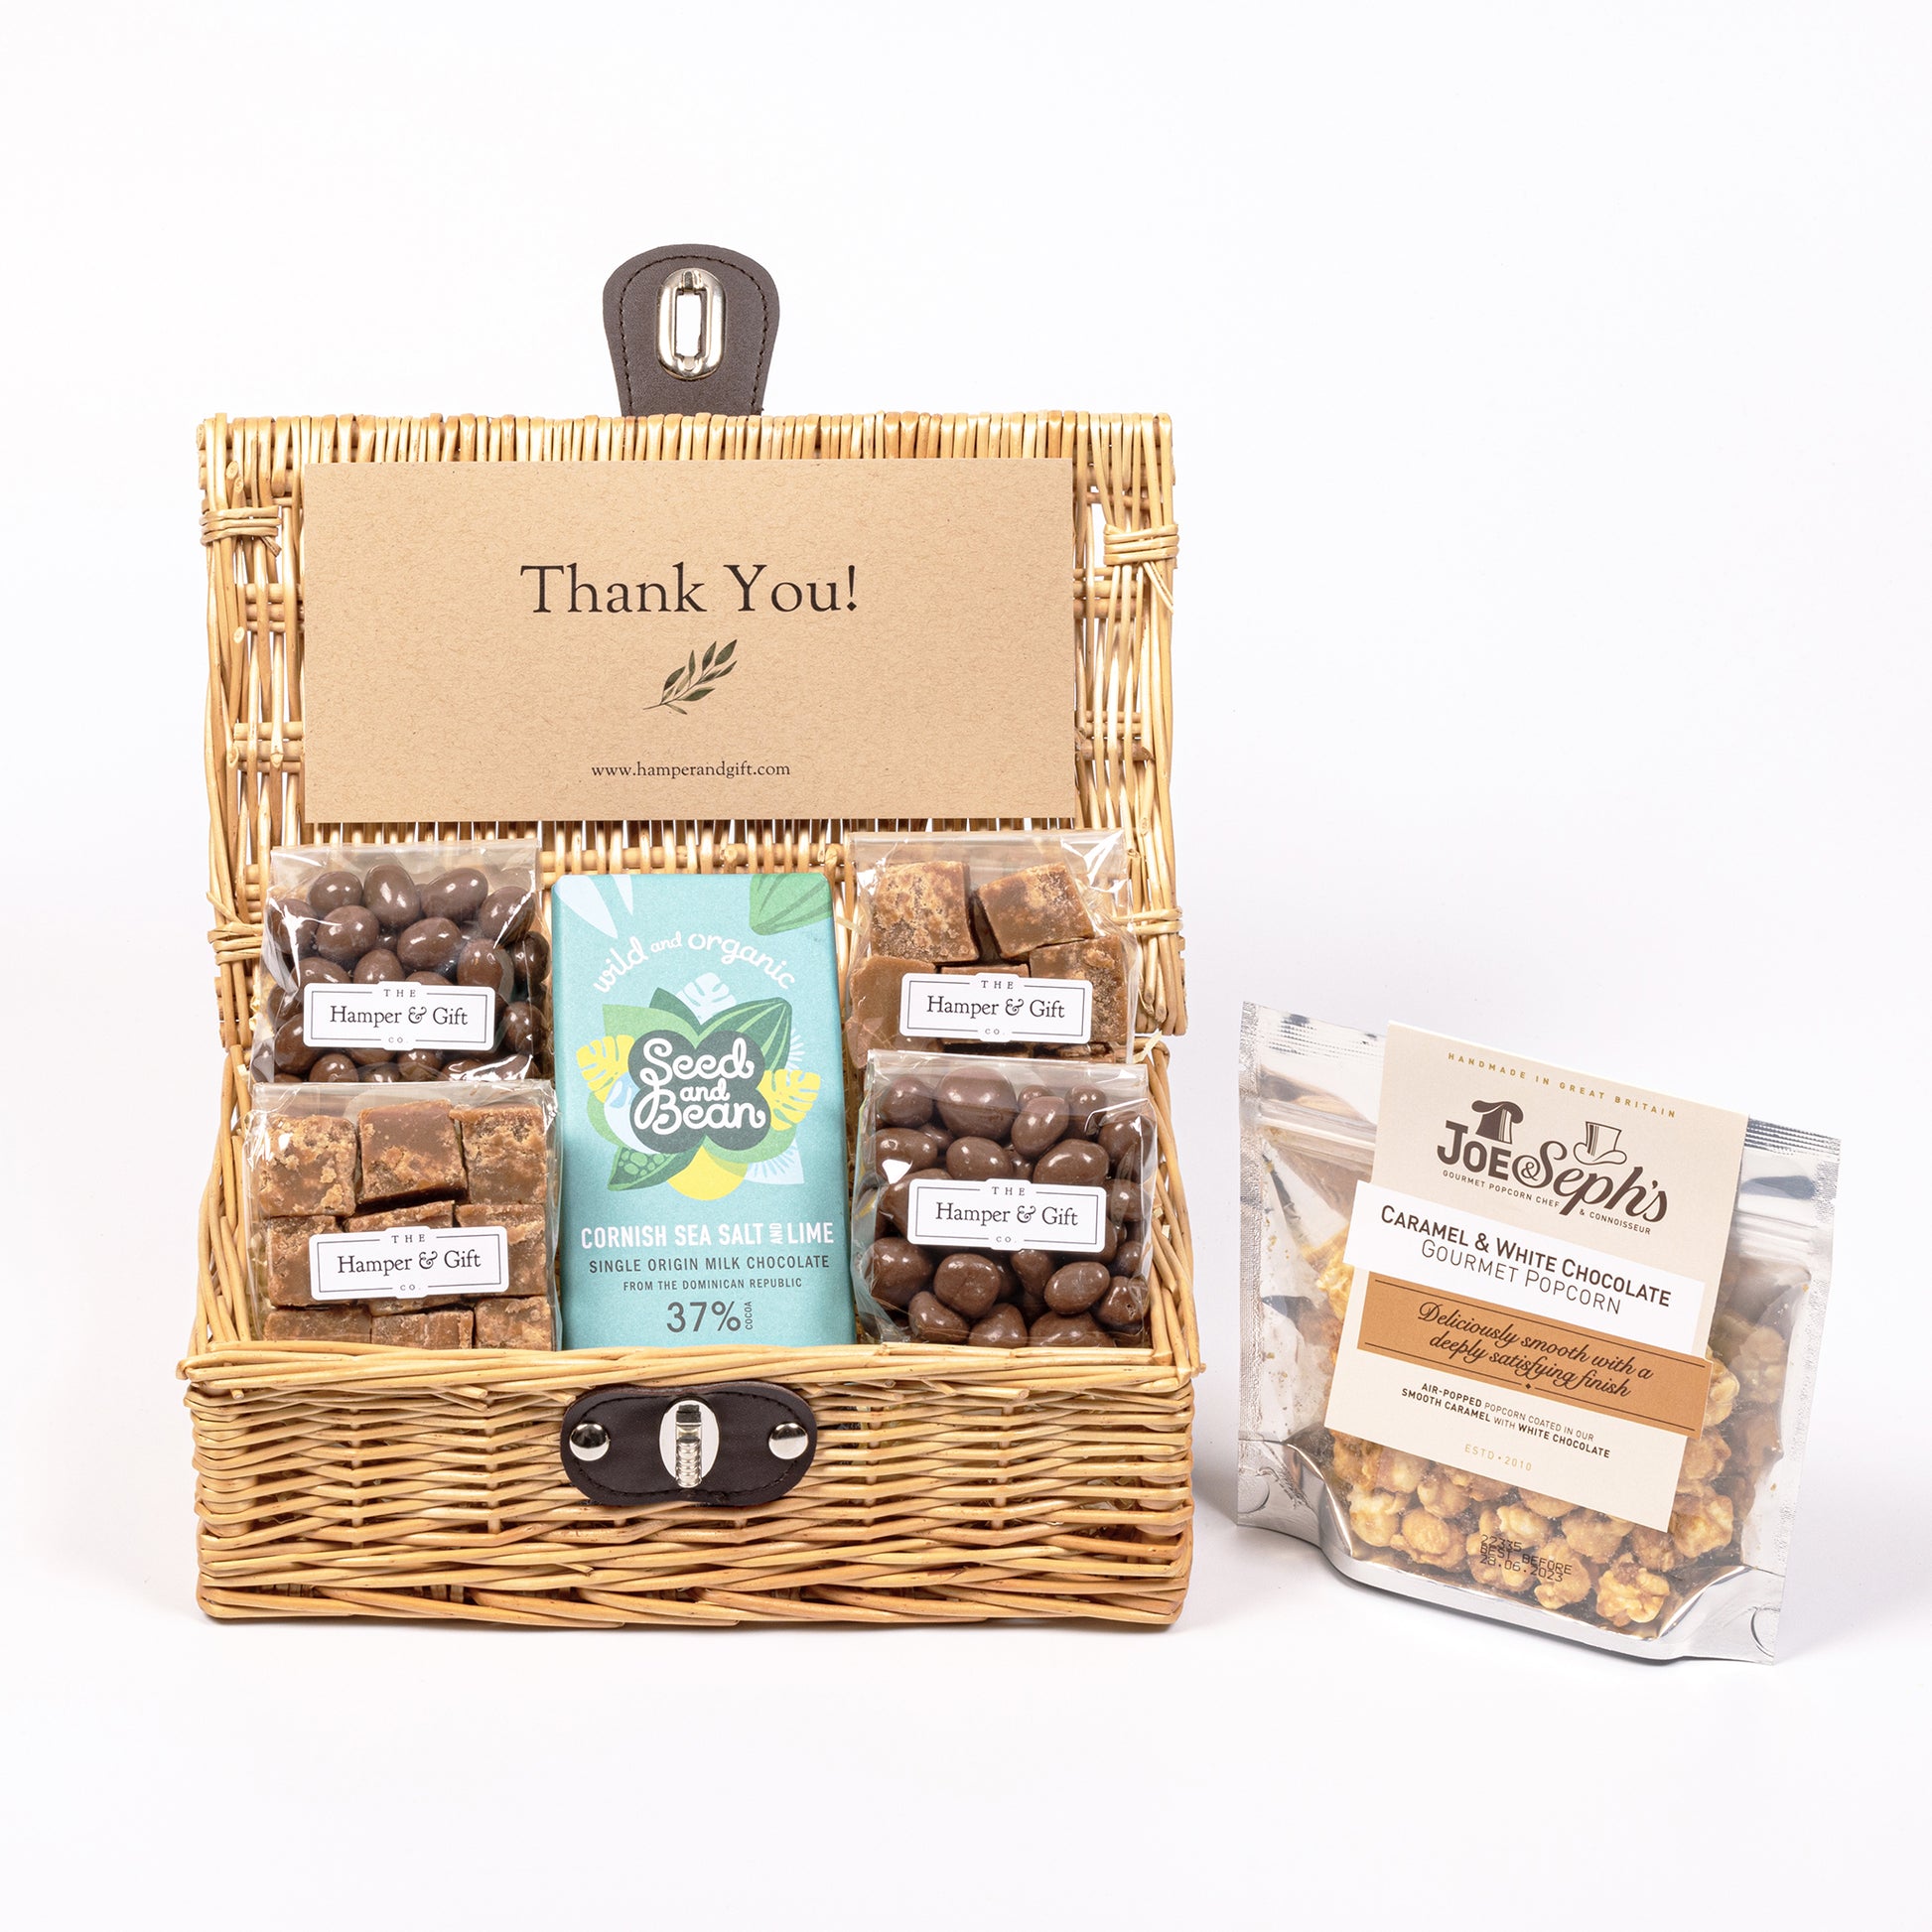 Thank You Hamper filled with chocolate, fudge and gourmet popcorn